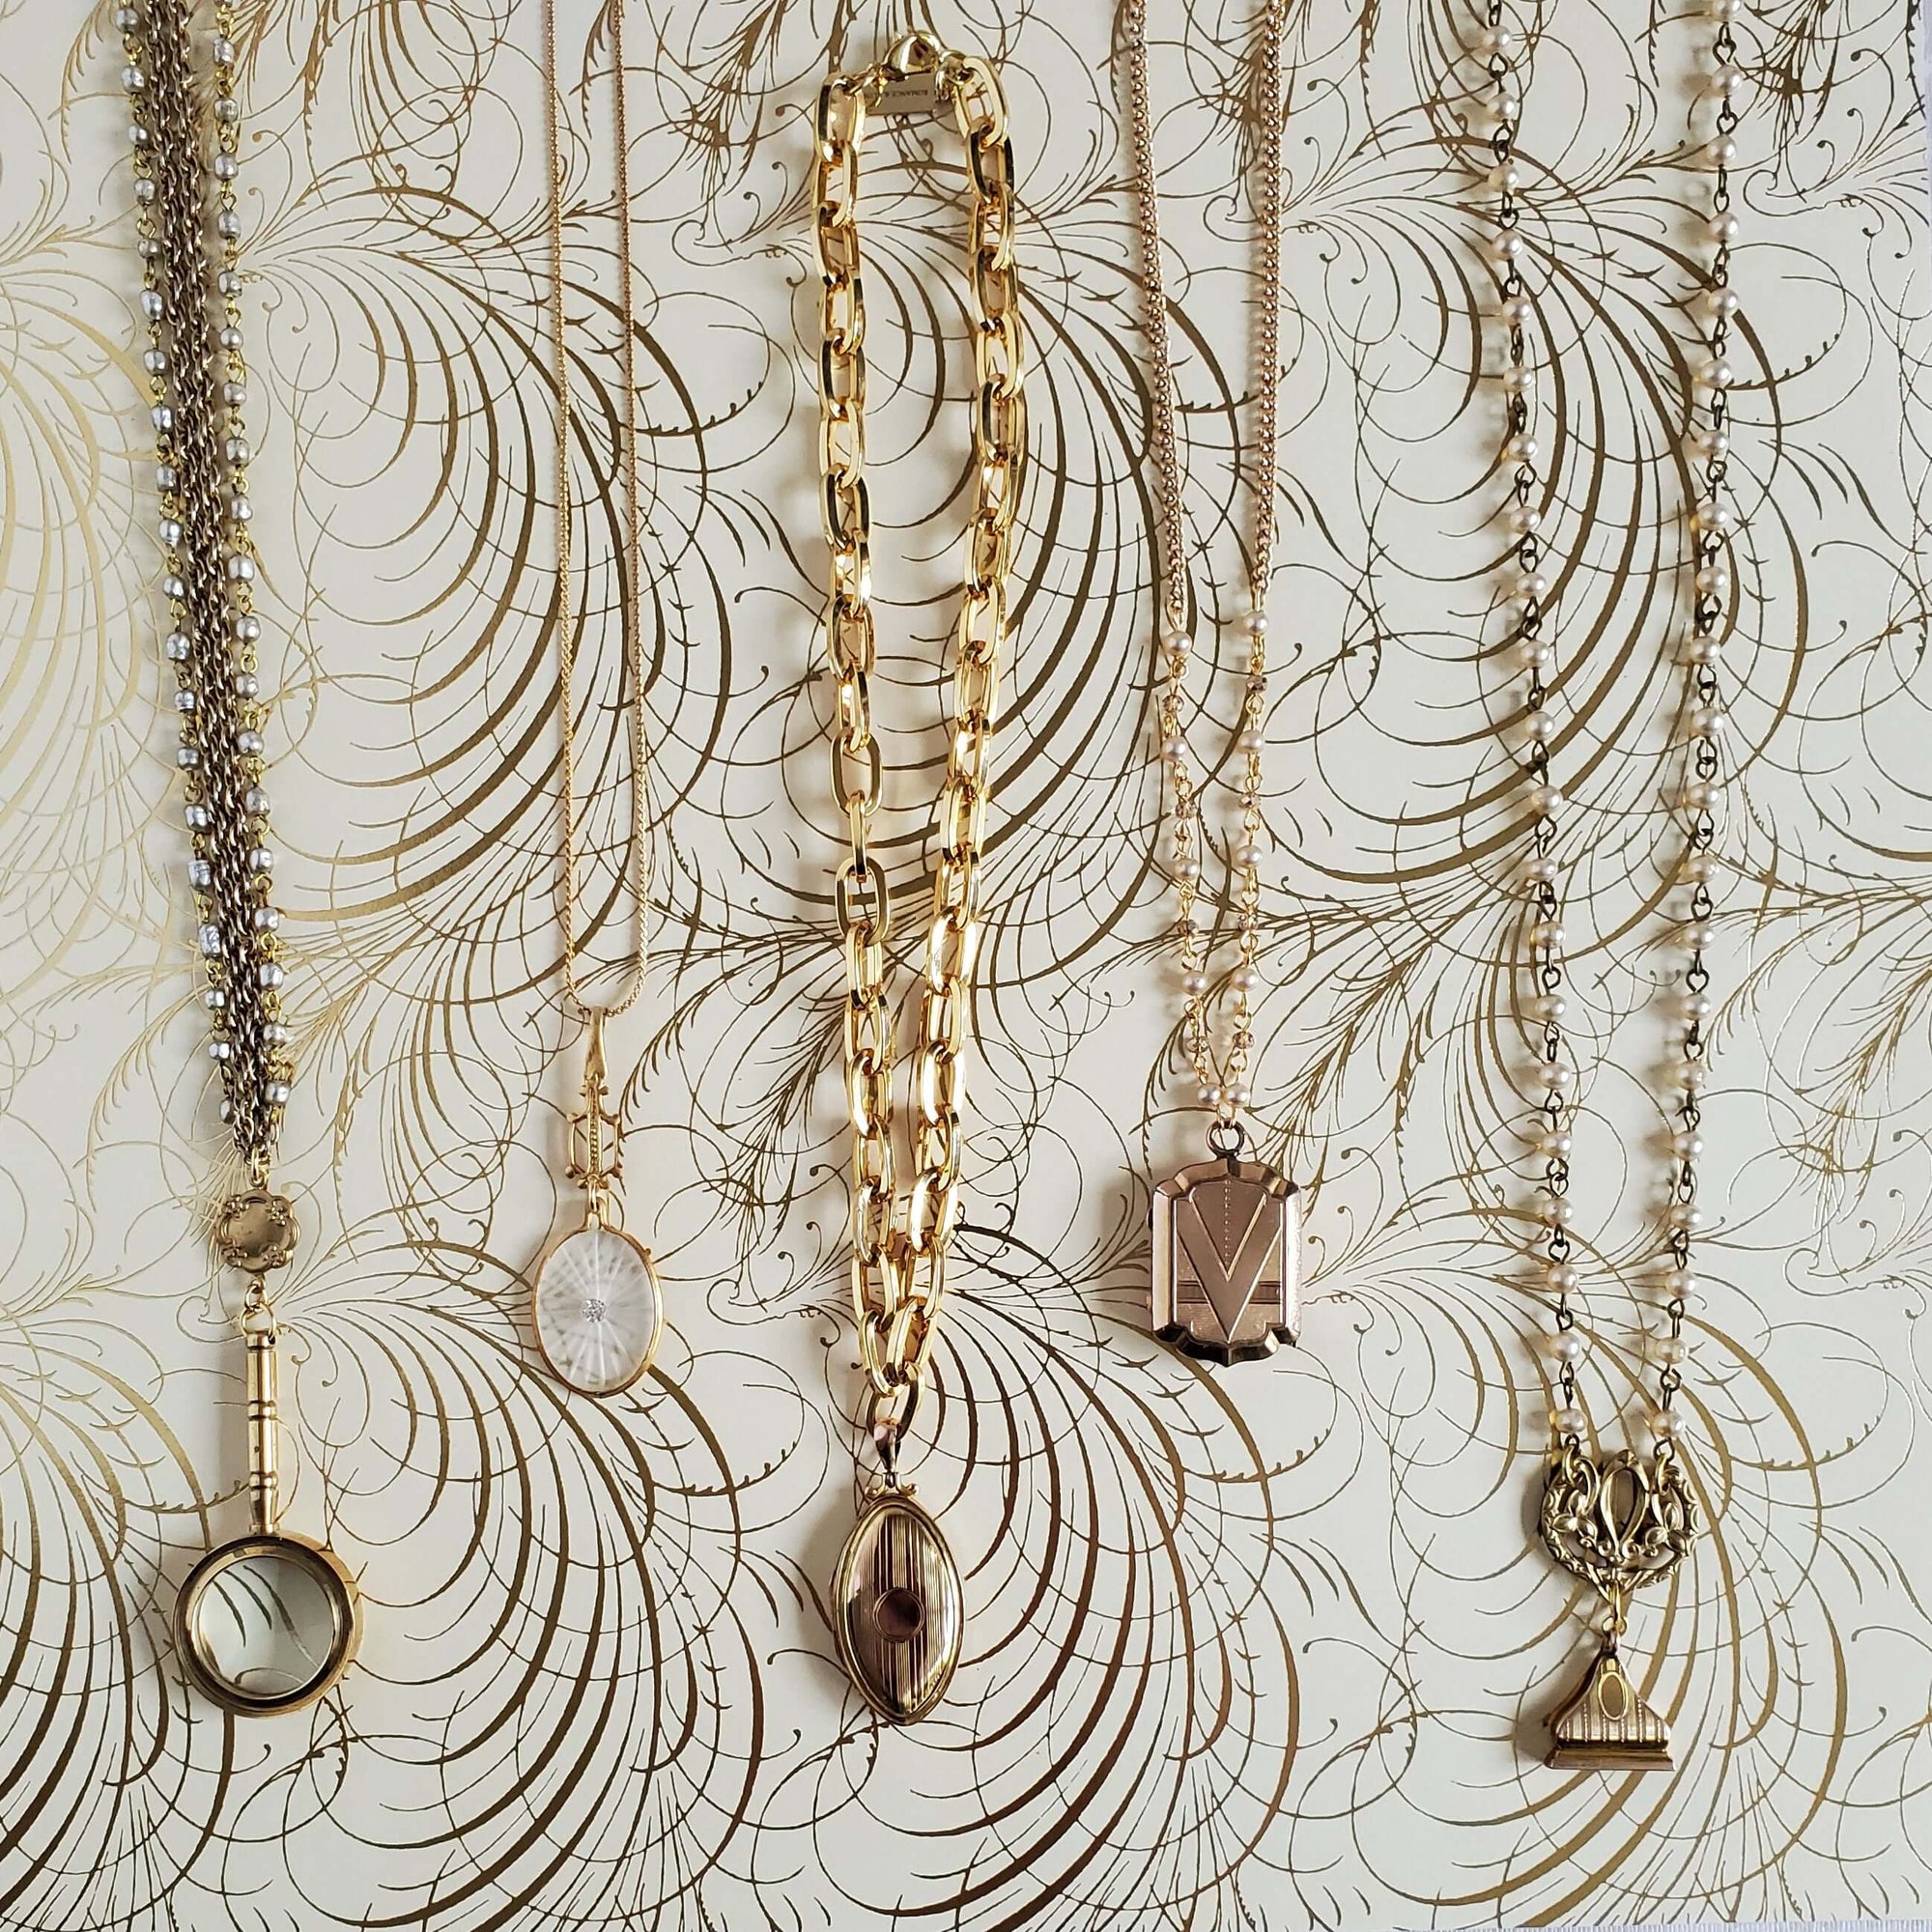 Antique and vintage Necklace Collection